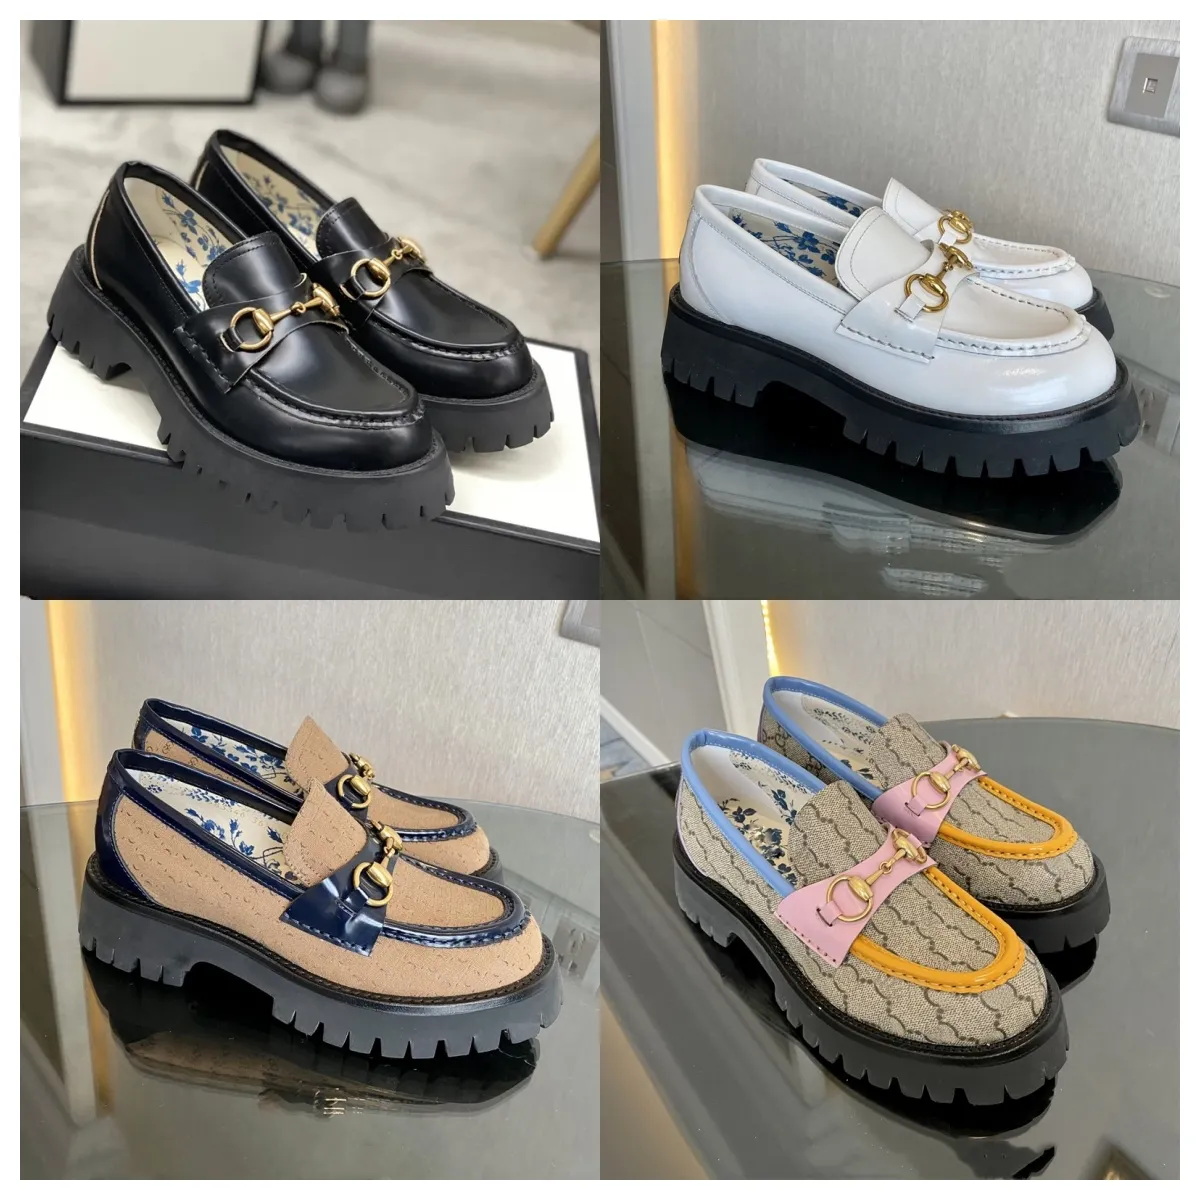 New Designer women casual shoe platform lug sole loafers metal buckles thick soles womens lady girl luxury leather casual shoes size 35-42